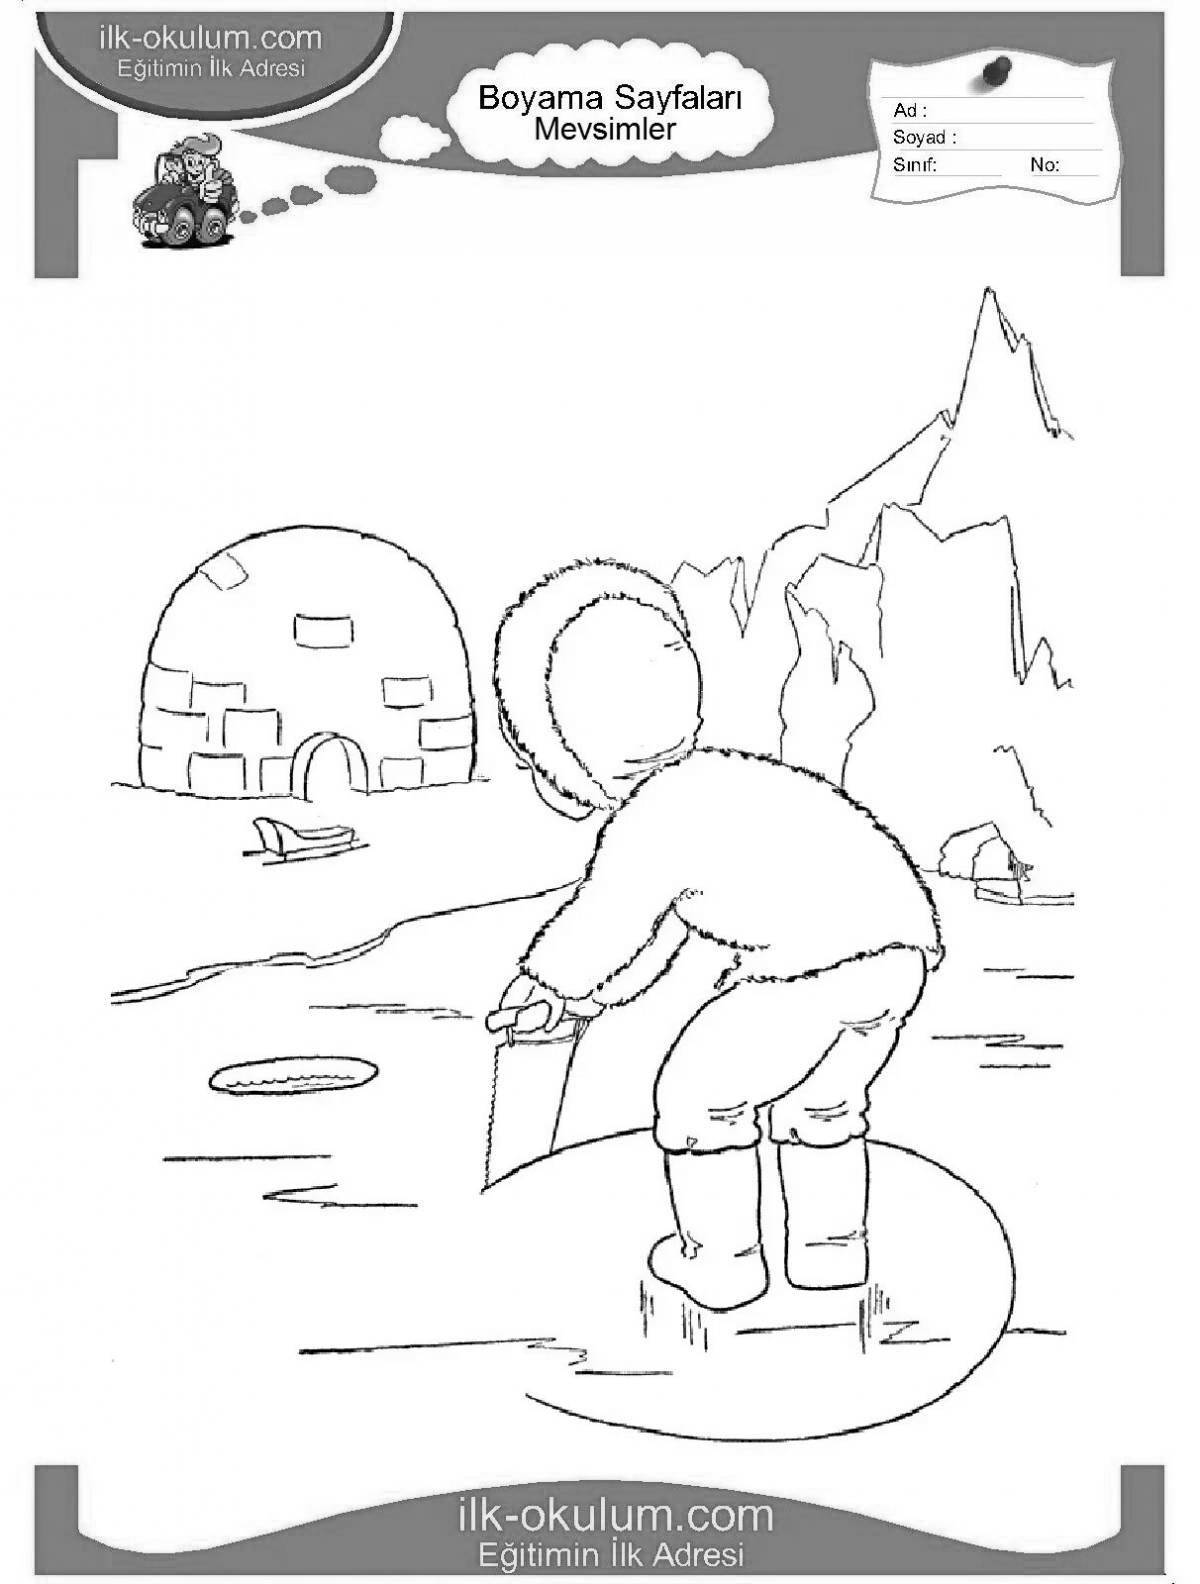 Bright ice coloring page